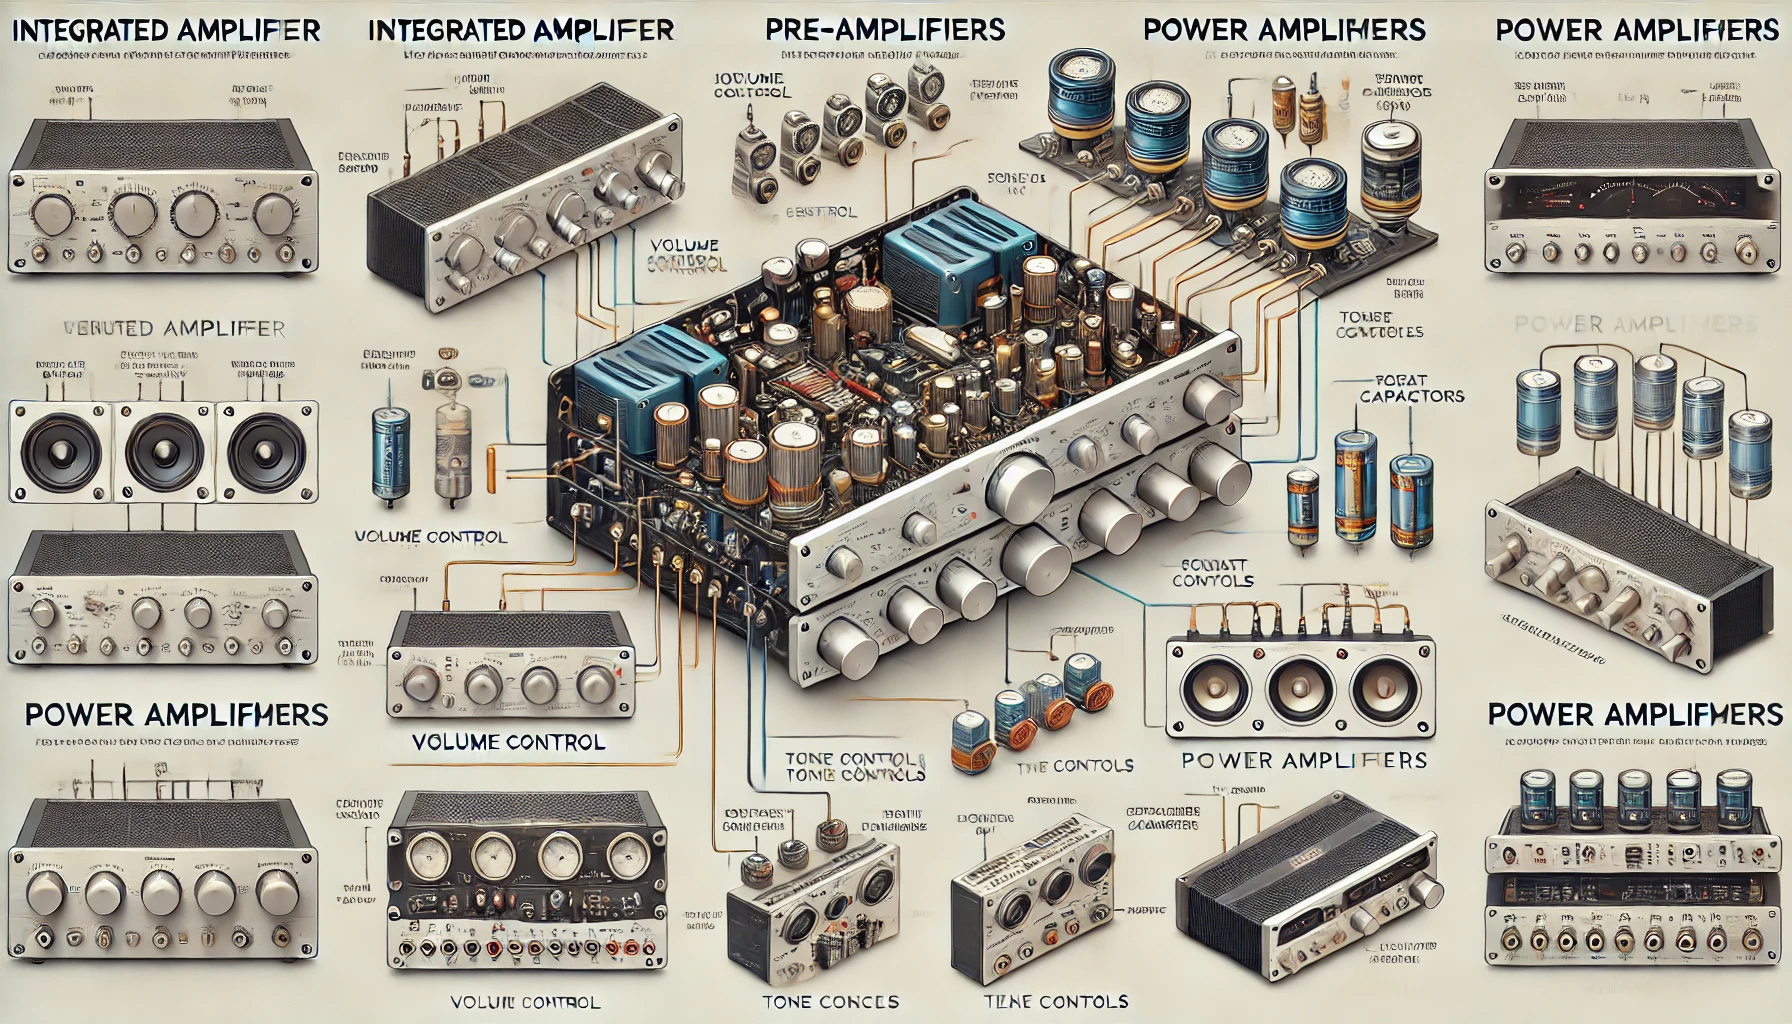 Amplifier Classifications: Integrated, Pre-amplifiers, and Power Amplifiers